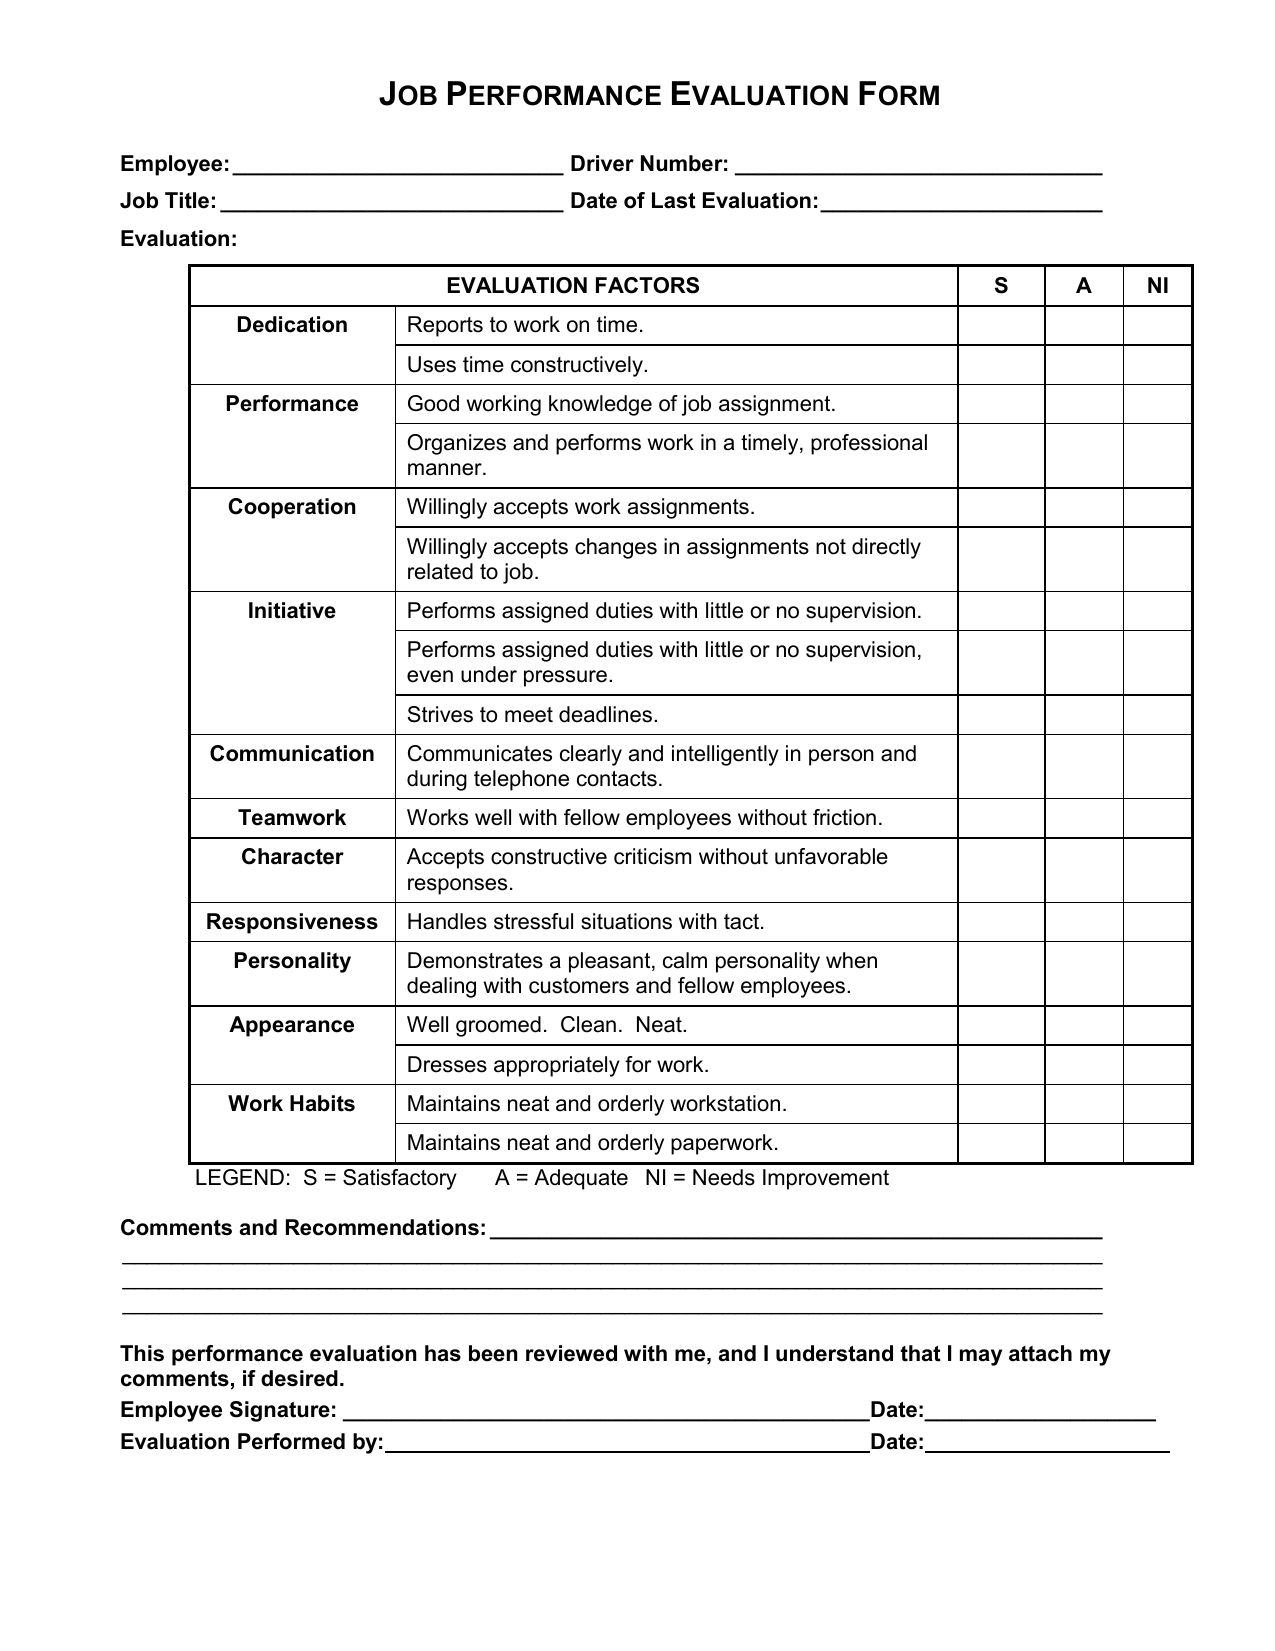 General Performance Evaluation Form Drivers